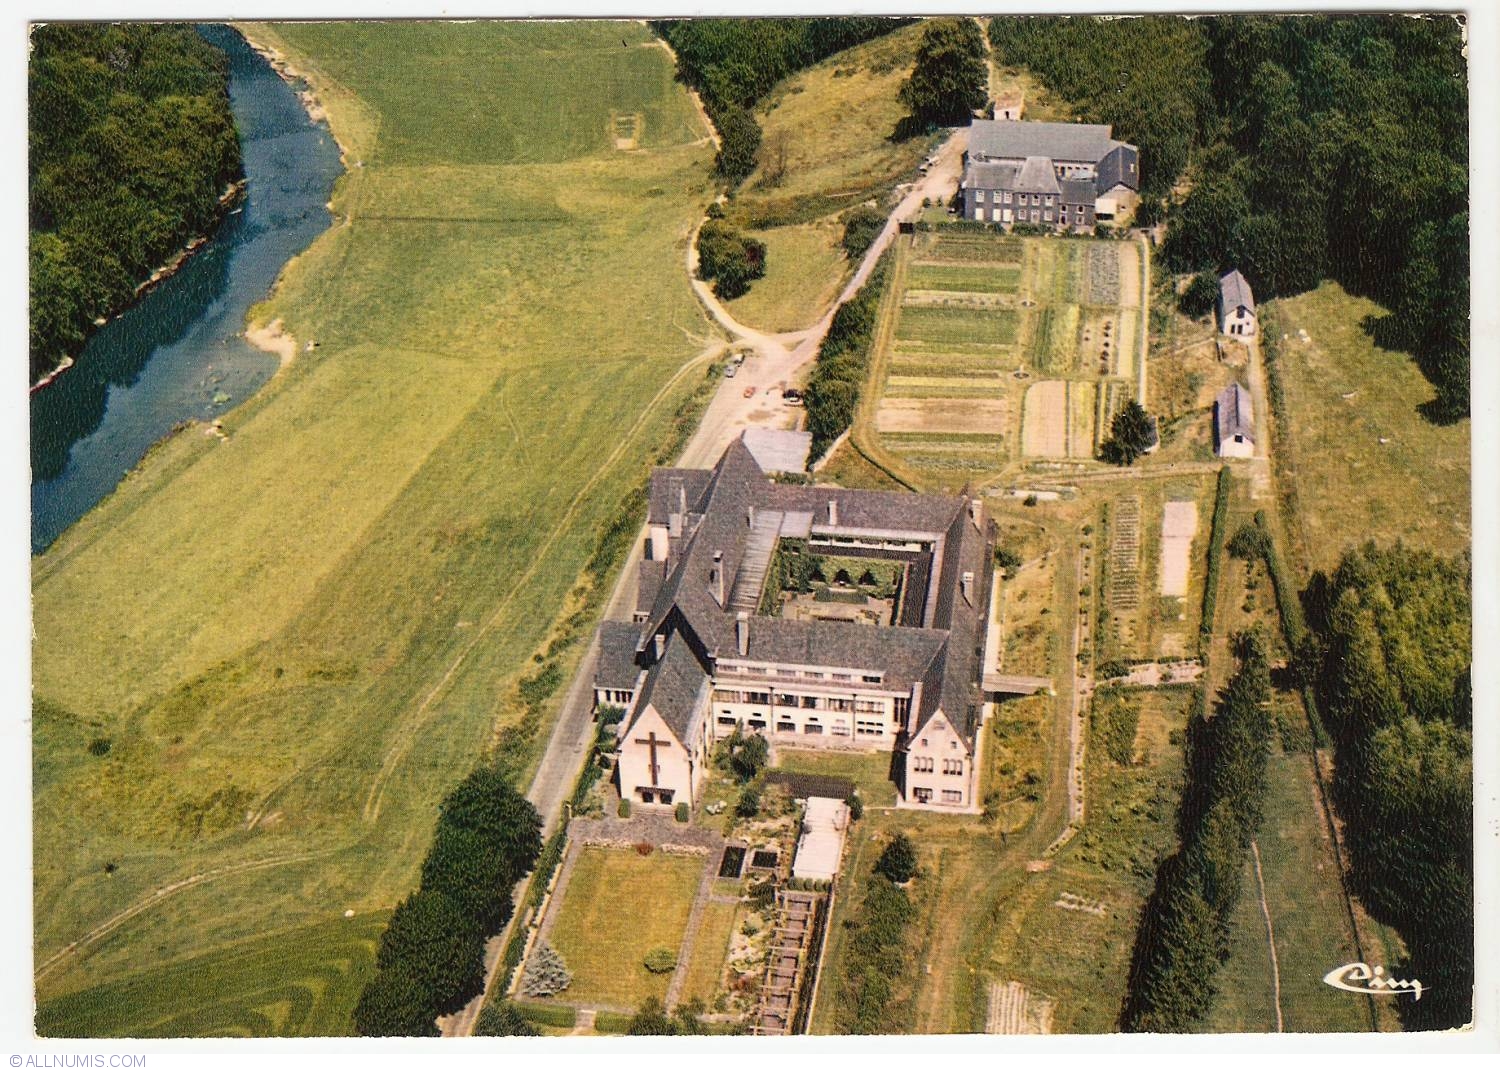 Aerial view of Cistercian Abbey build in 1935 near the ruins